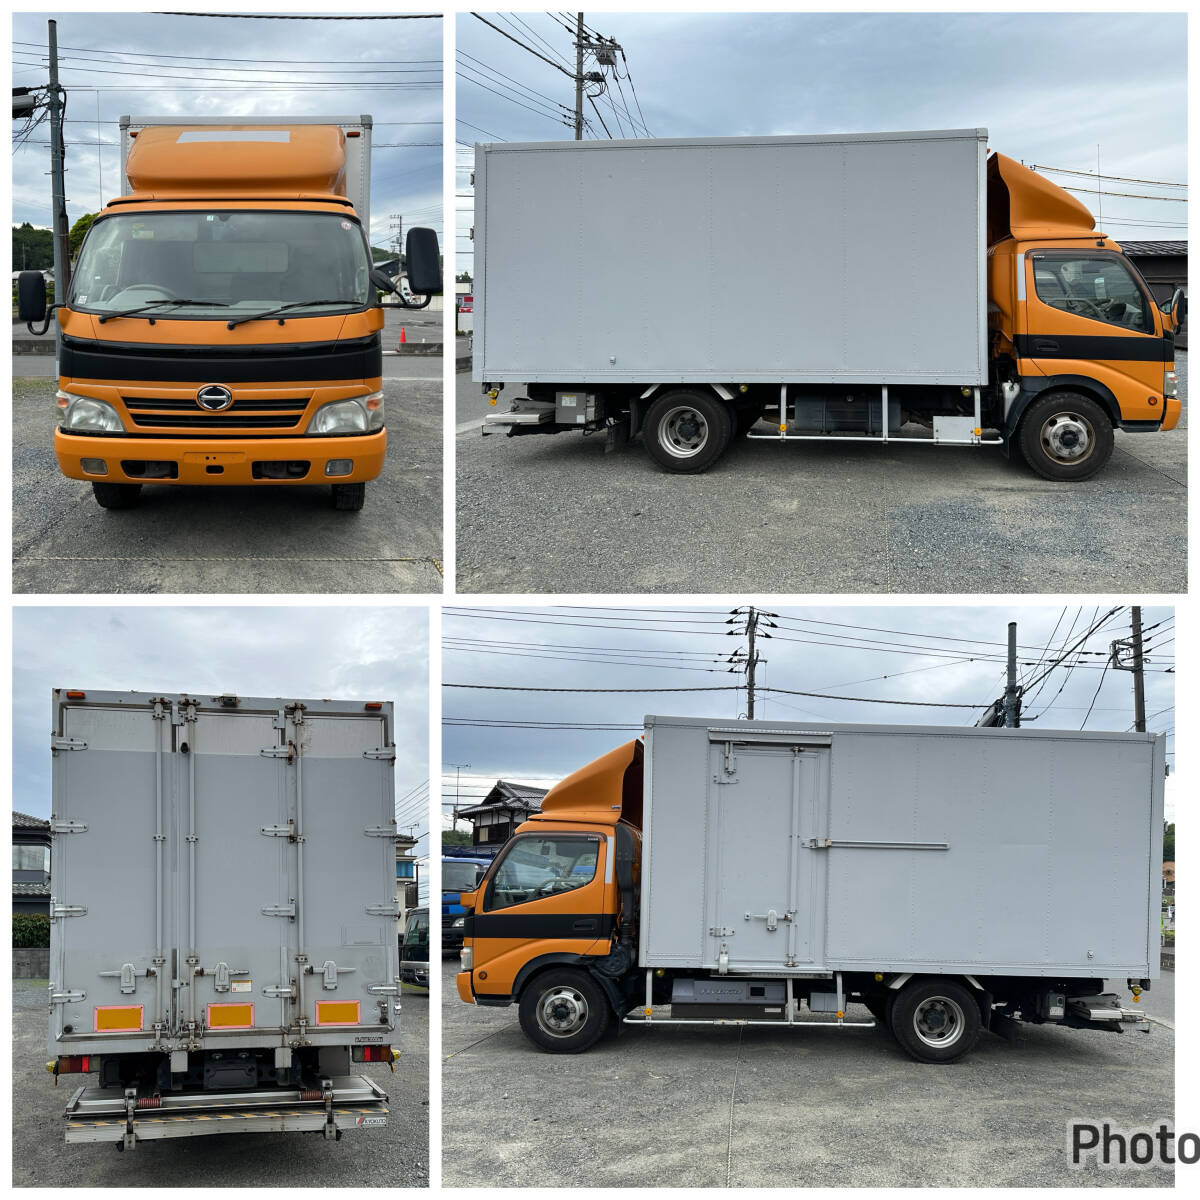  quotient . possibility!H21 year Hino Dutro,6 speed diesel turbo! north . made aluminum van! Kyokuto storage type power gate! frame corrosion less! carrier floor stainless steel 